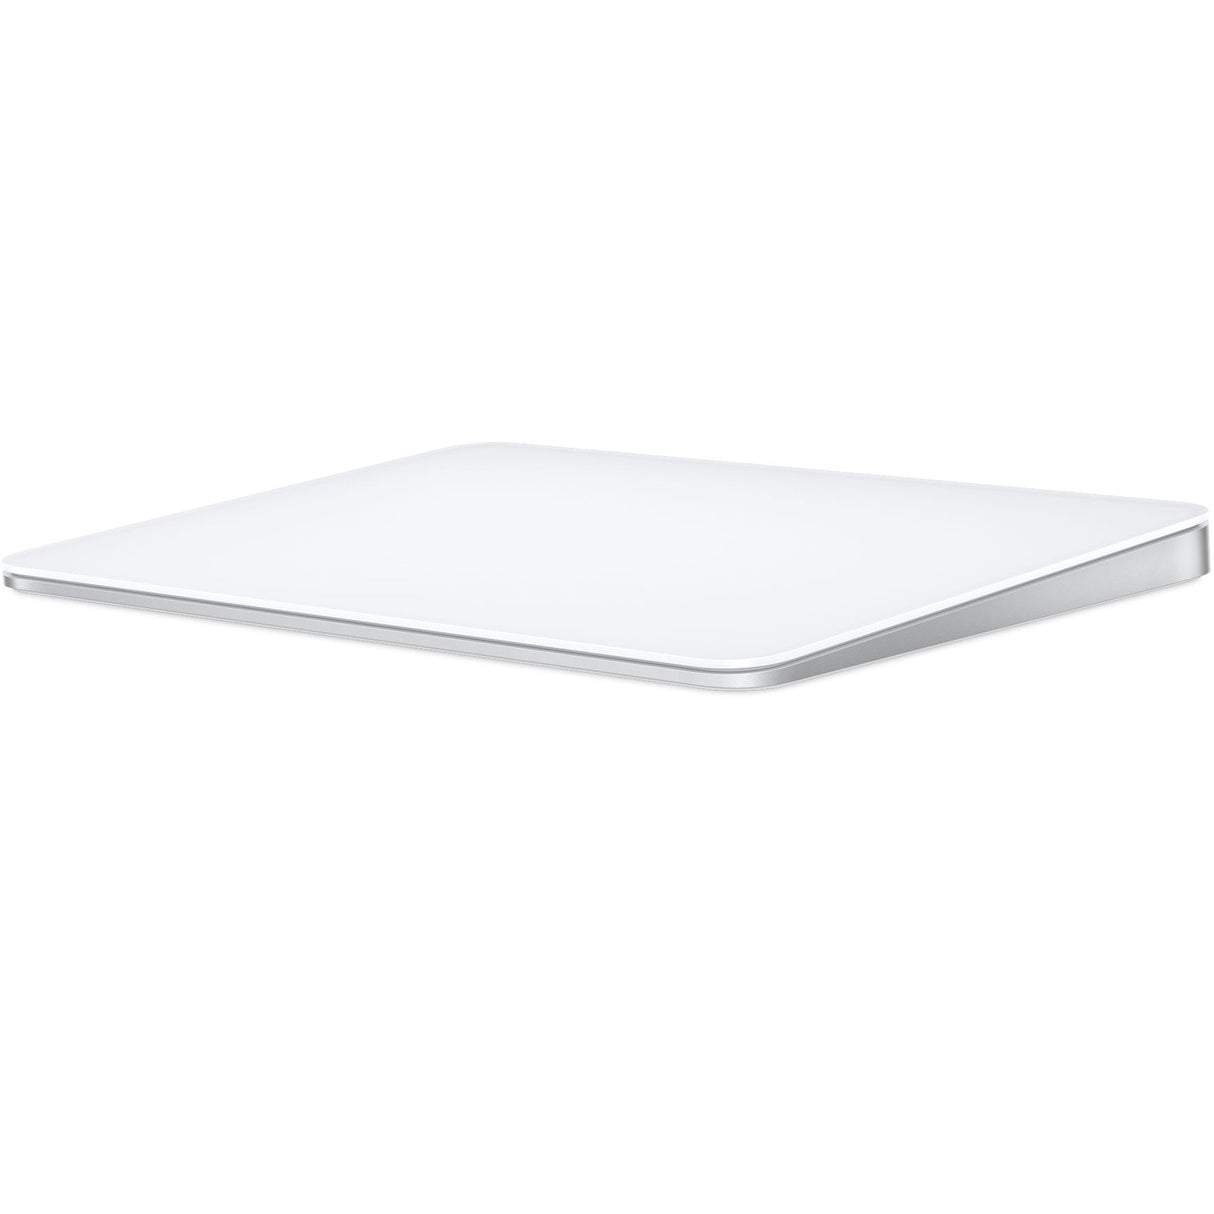 Mouse Apple Magic Trackpad 3 (2021) Wireless - NotebookGsm